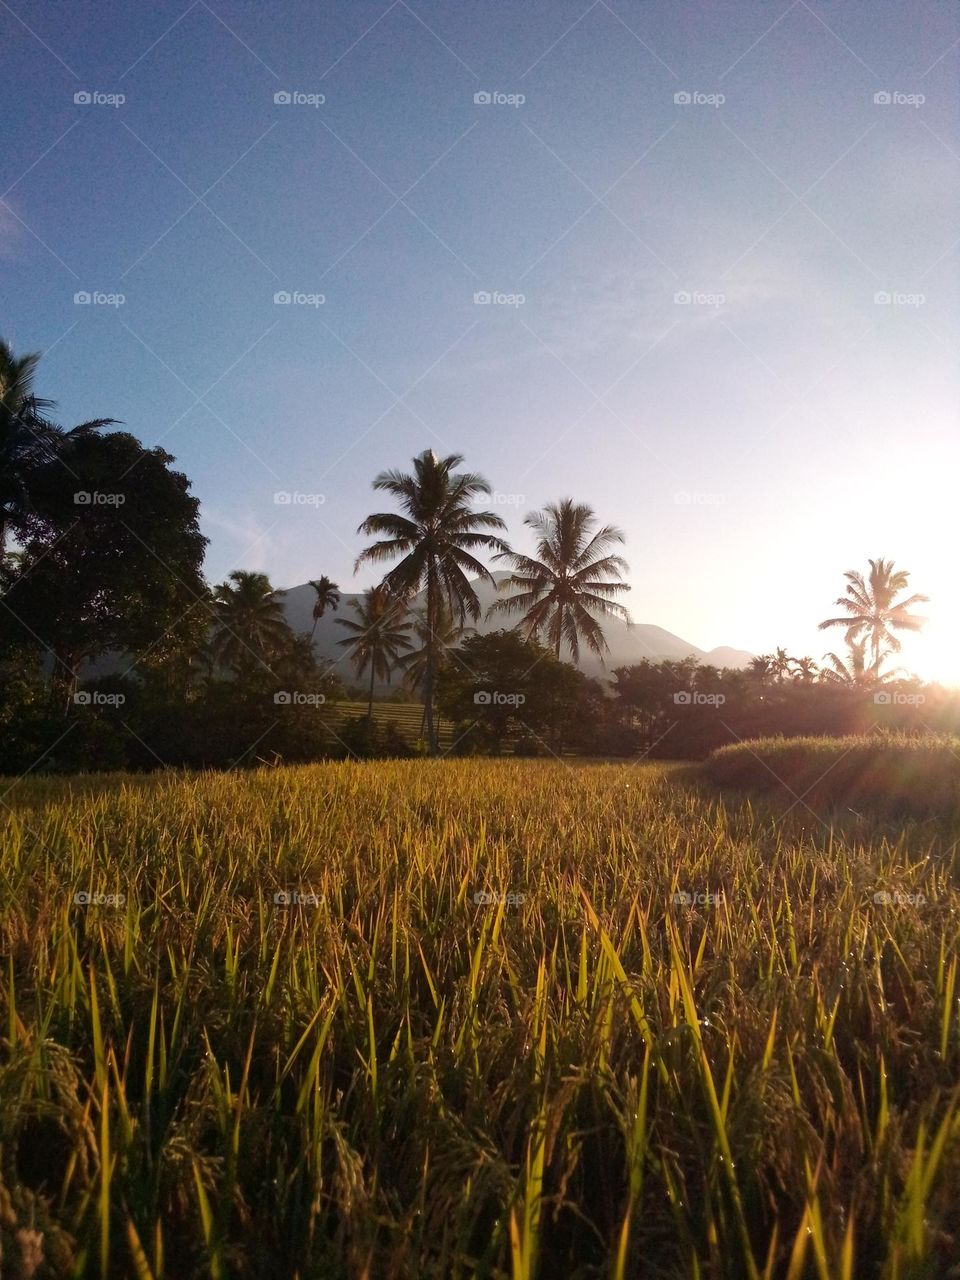 Beauty morning at rice fields